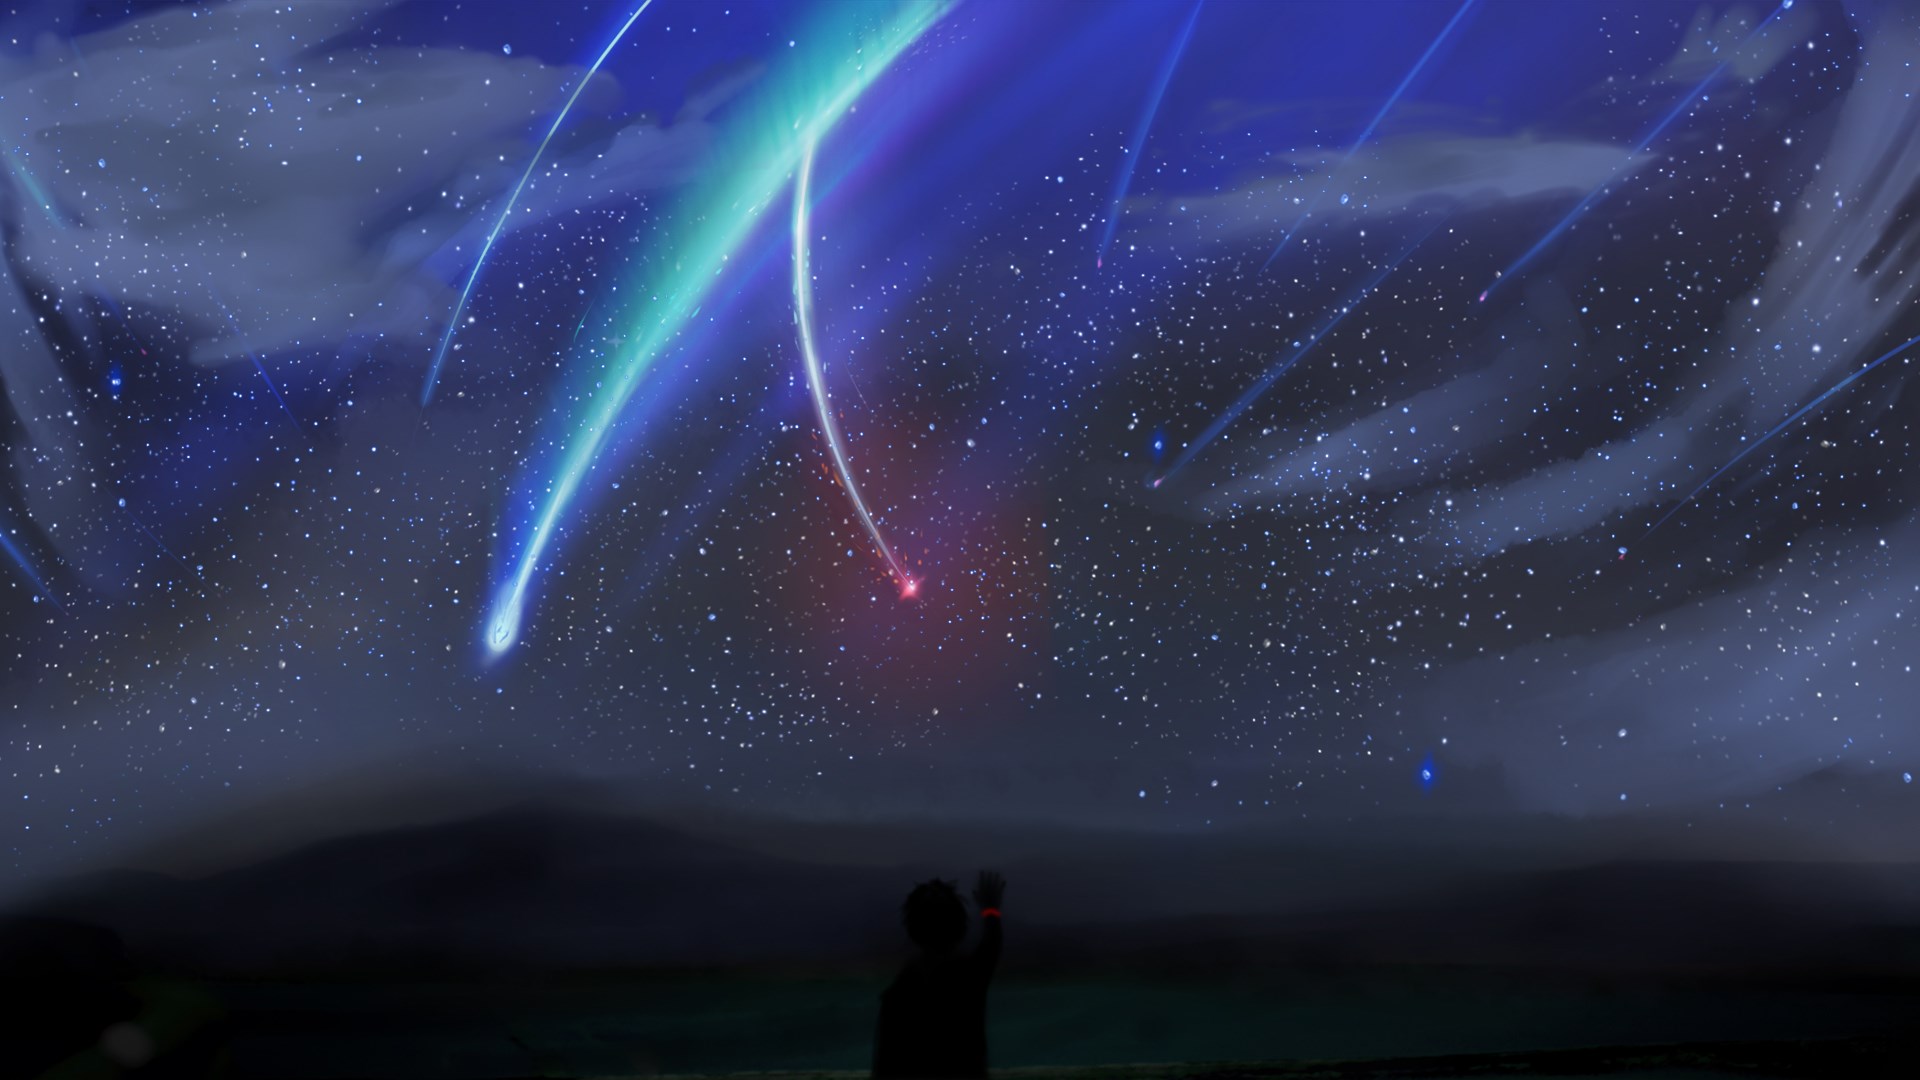 wallpapers that say your name,sky,aurora,atmosphere,space,night